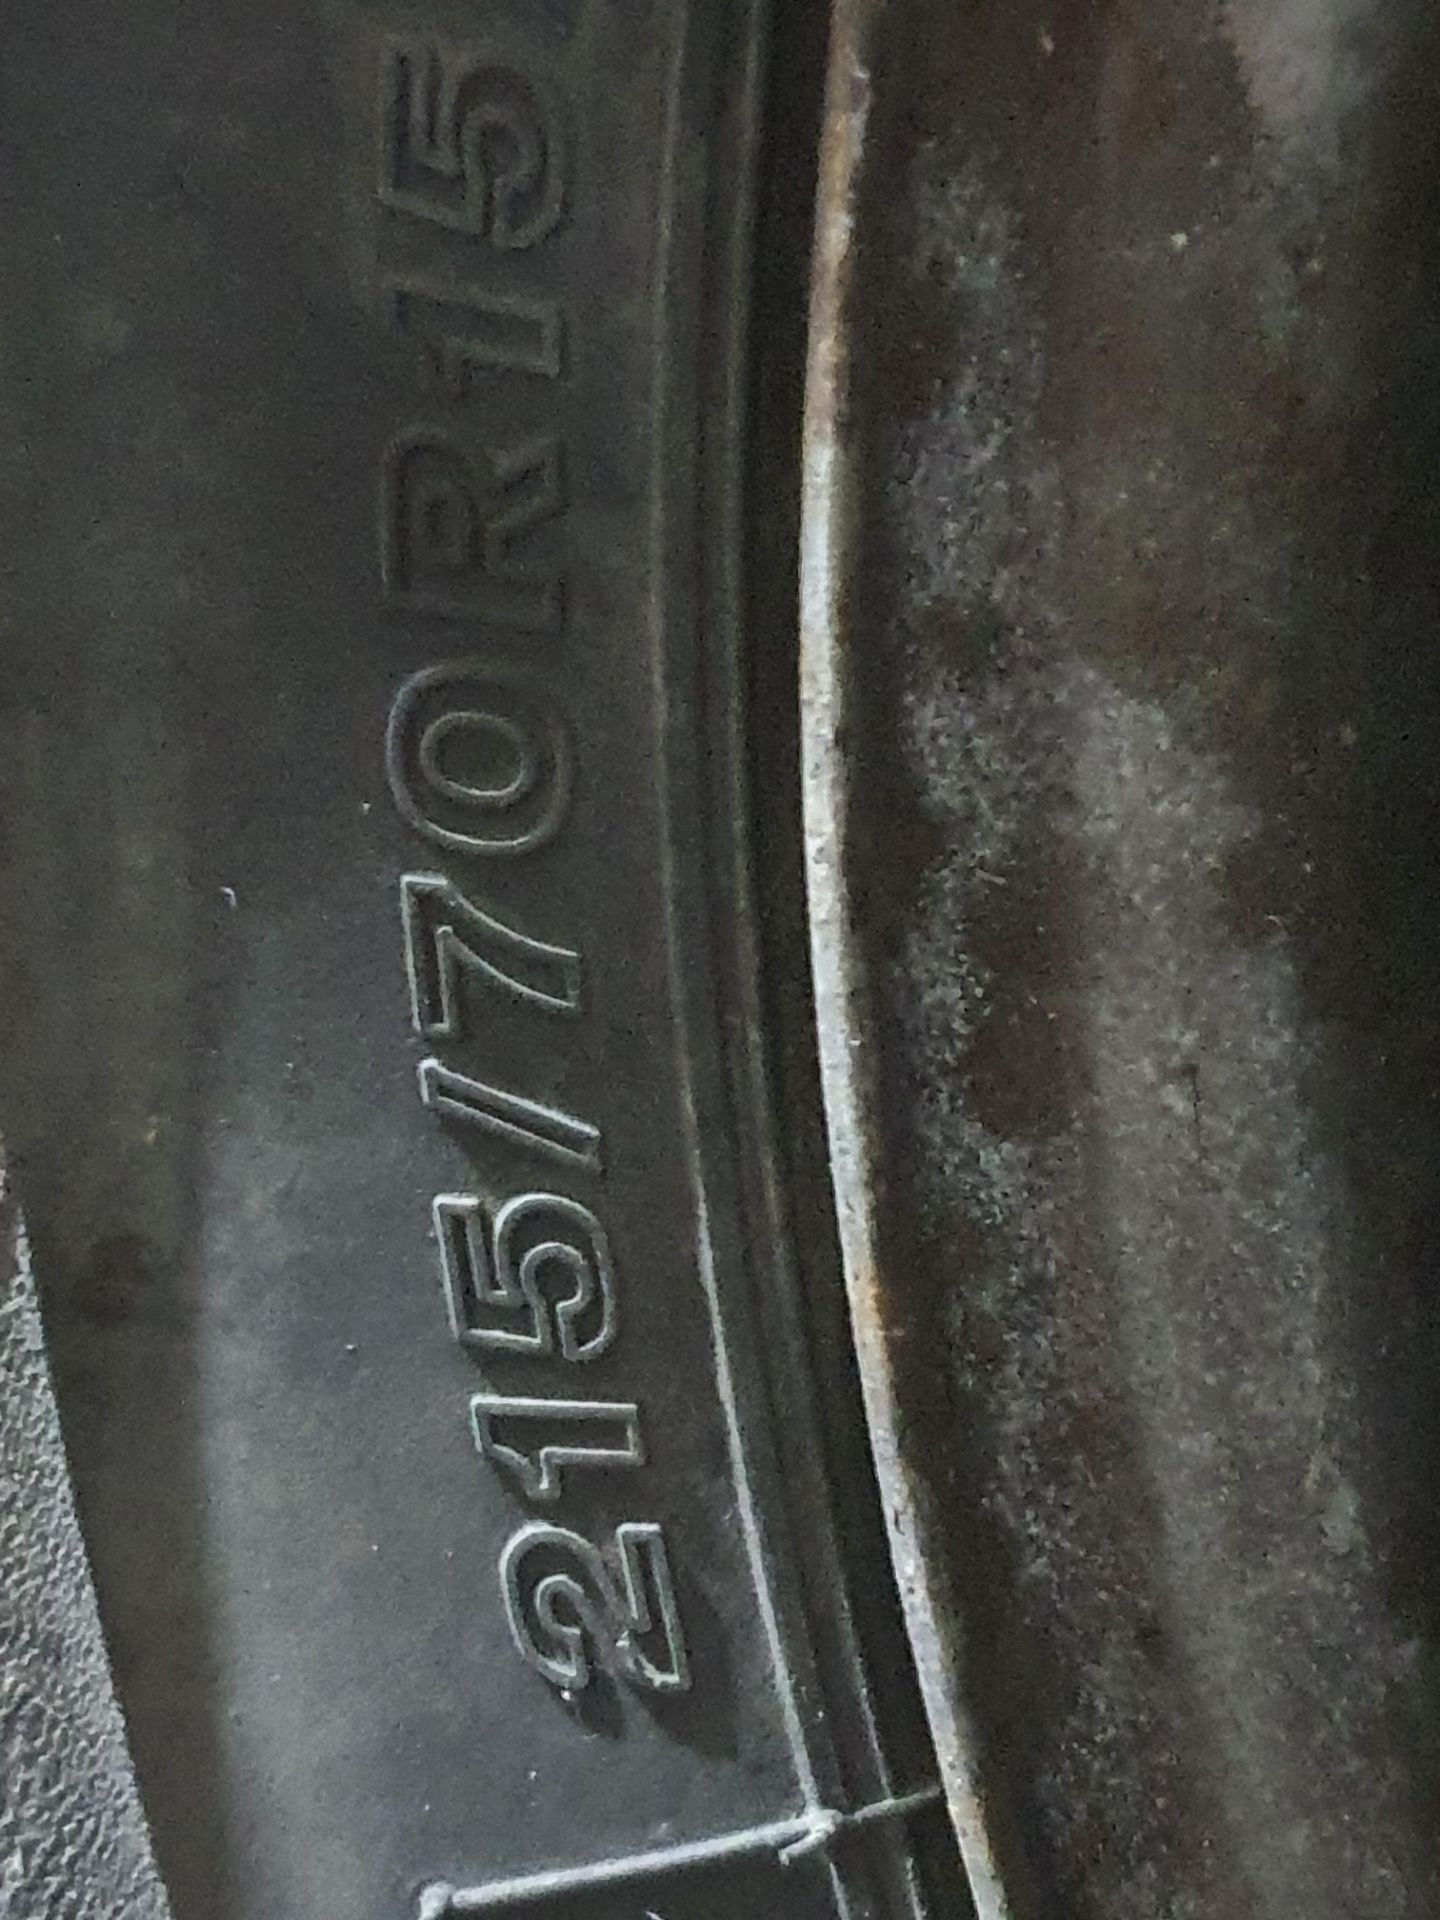 VW CRAFTER VAN WHEEL, TYRE IS FLAT, HAS A PUNCTURE - Image 3 of 3